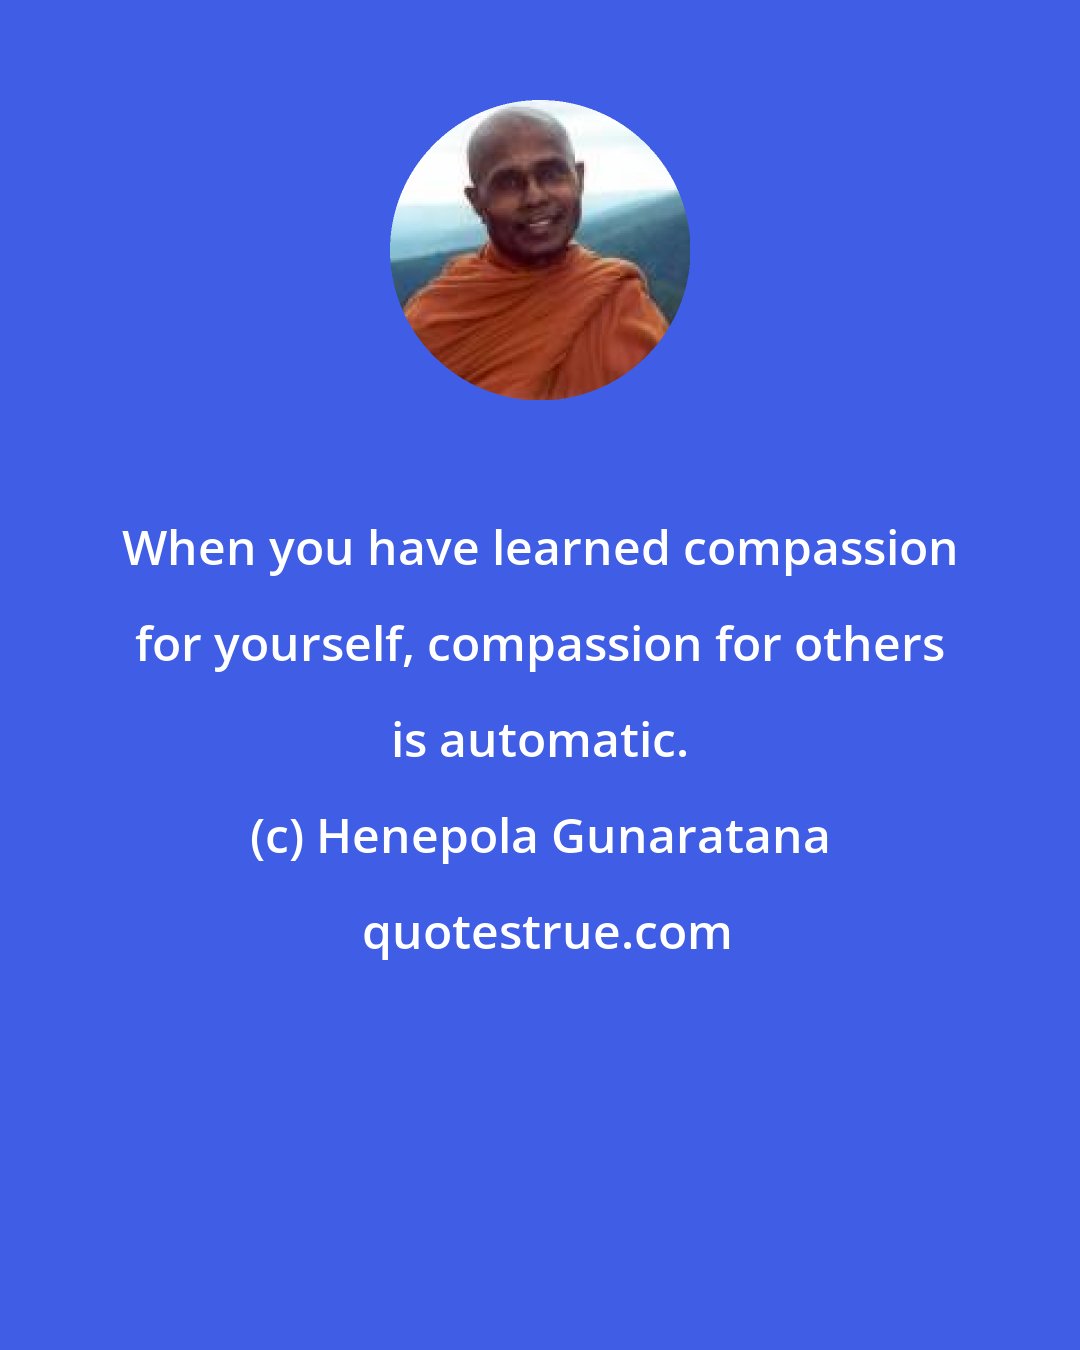 Henepola Gunaratana: When you have learned compassion for yourself, compassion for others is automatic.